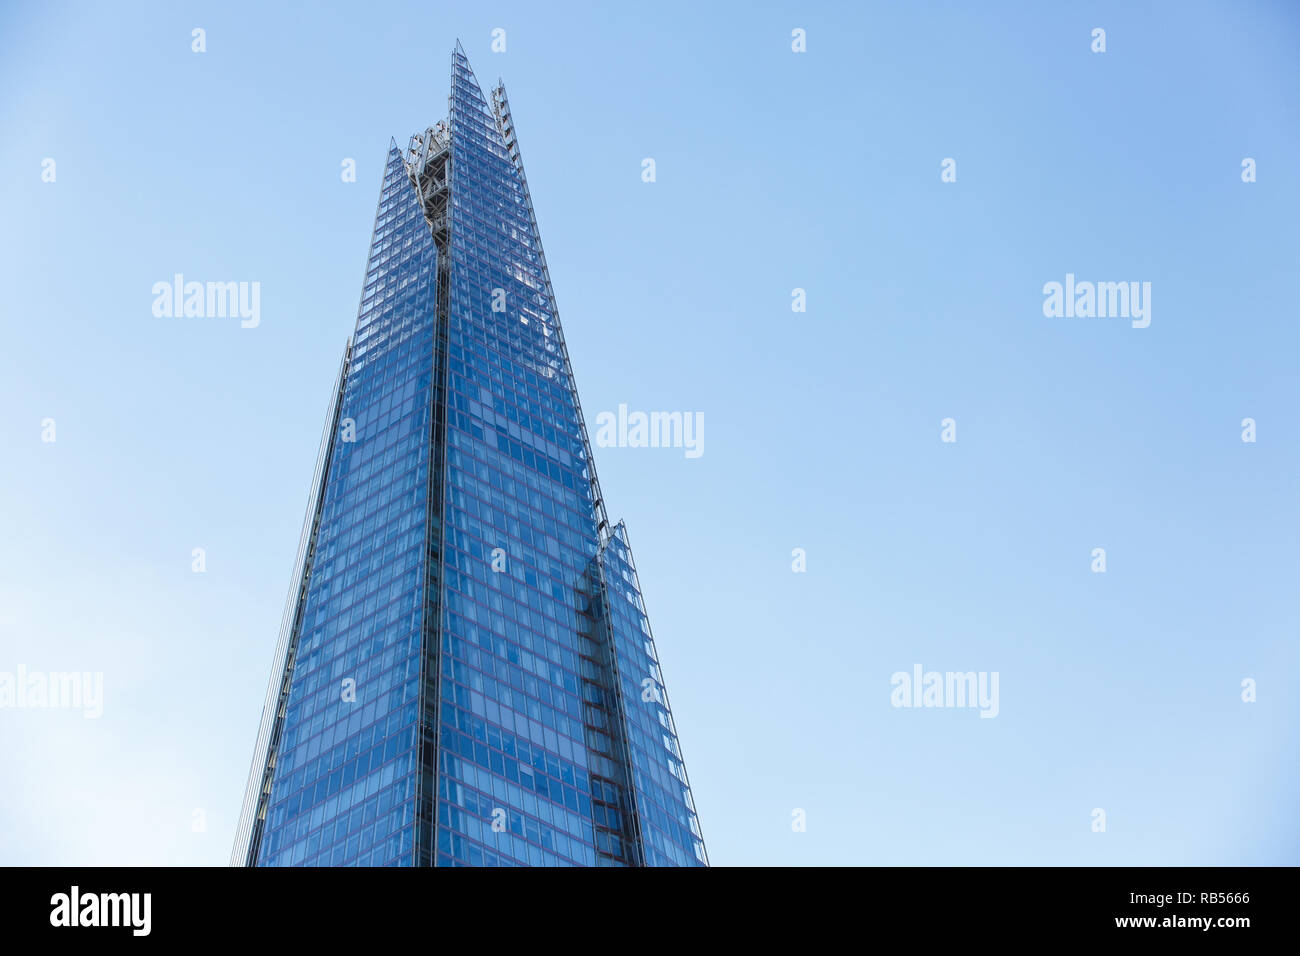 Skyscraper in London. Business, success, financial district, modern architecture and tourism sightseeing concept. Stock Photo